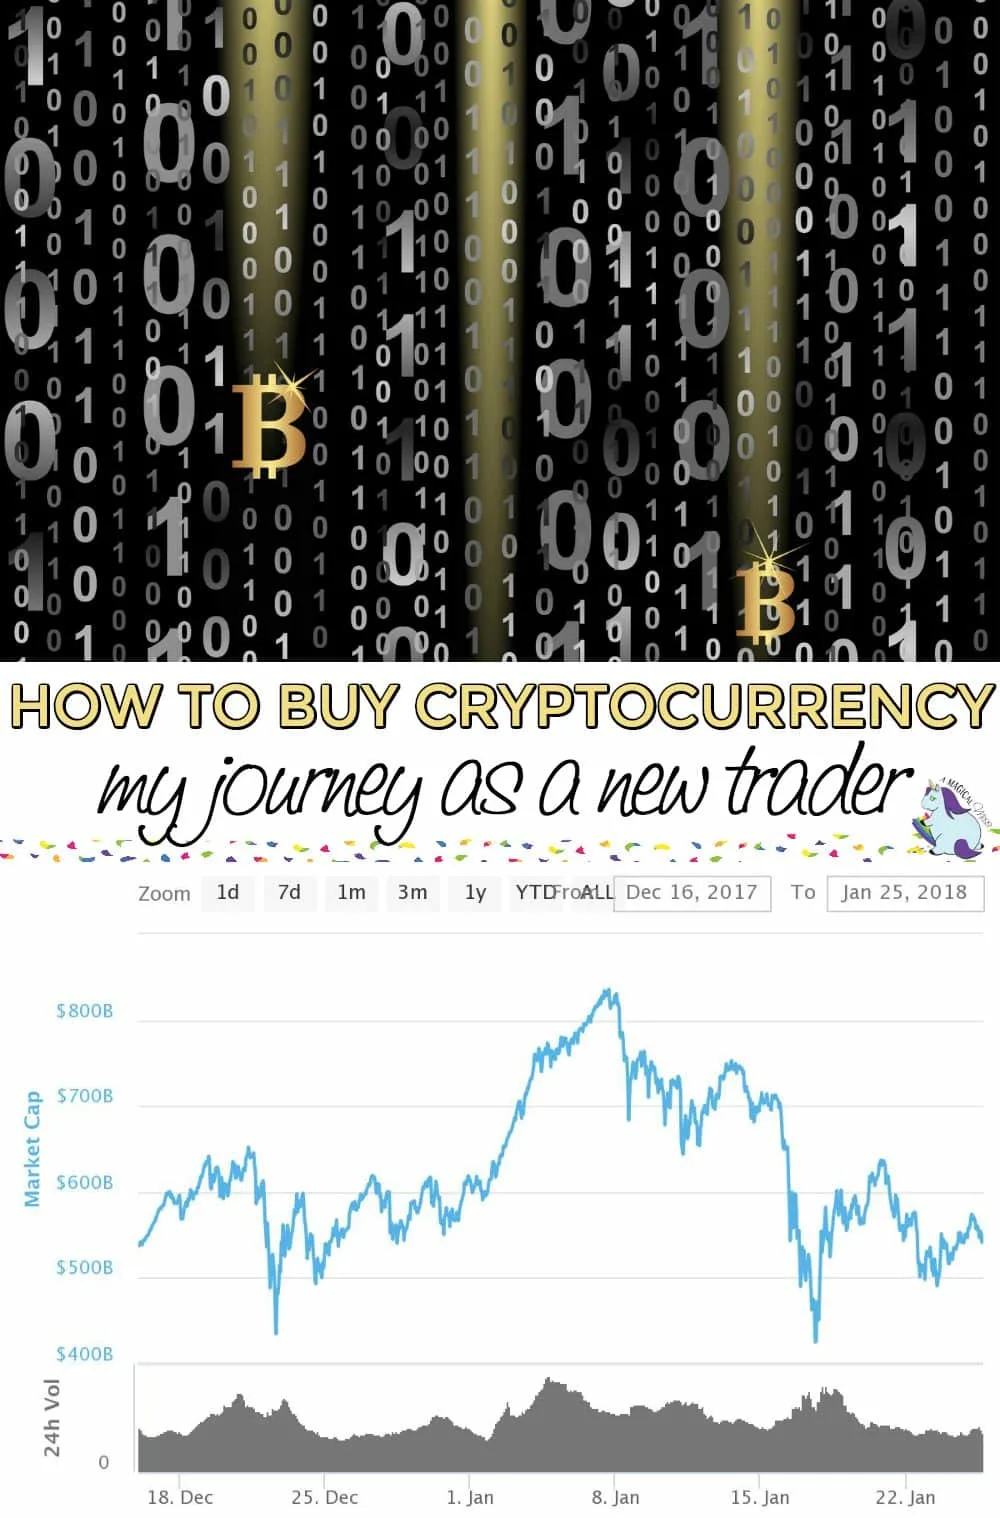 How to Buy Cryptocurrency and My Journey as a New Crypto Trader